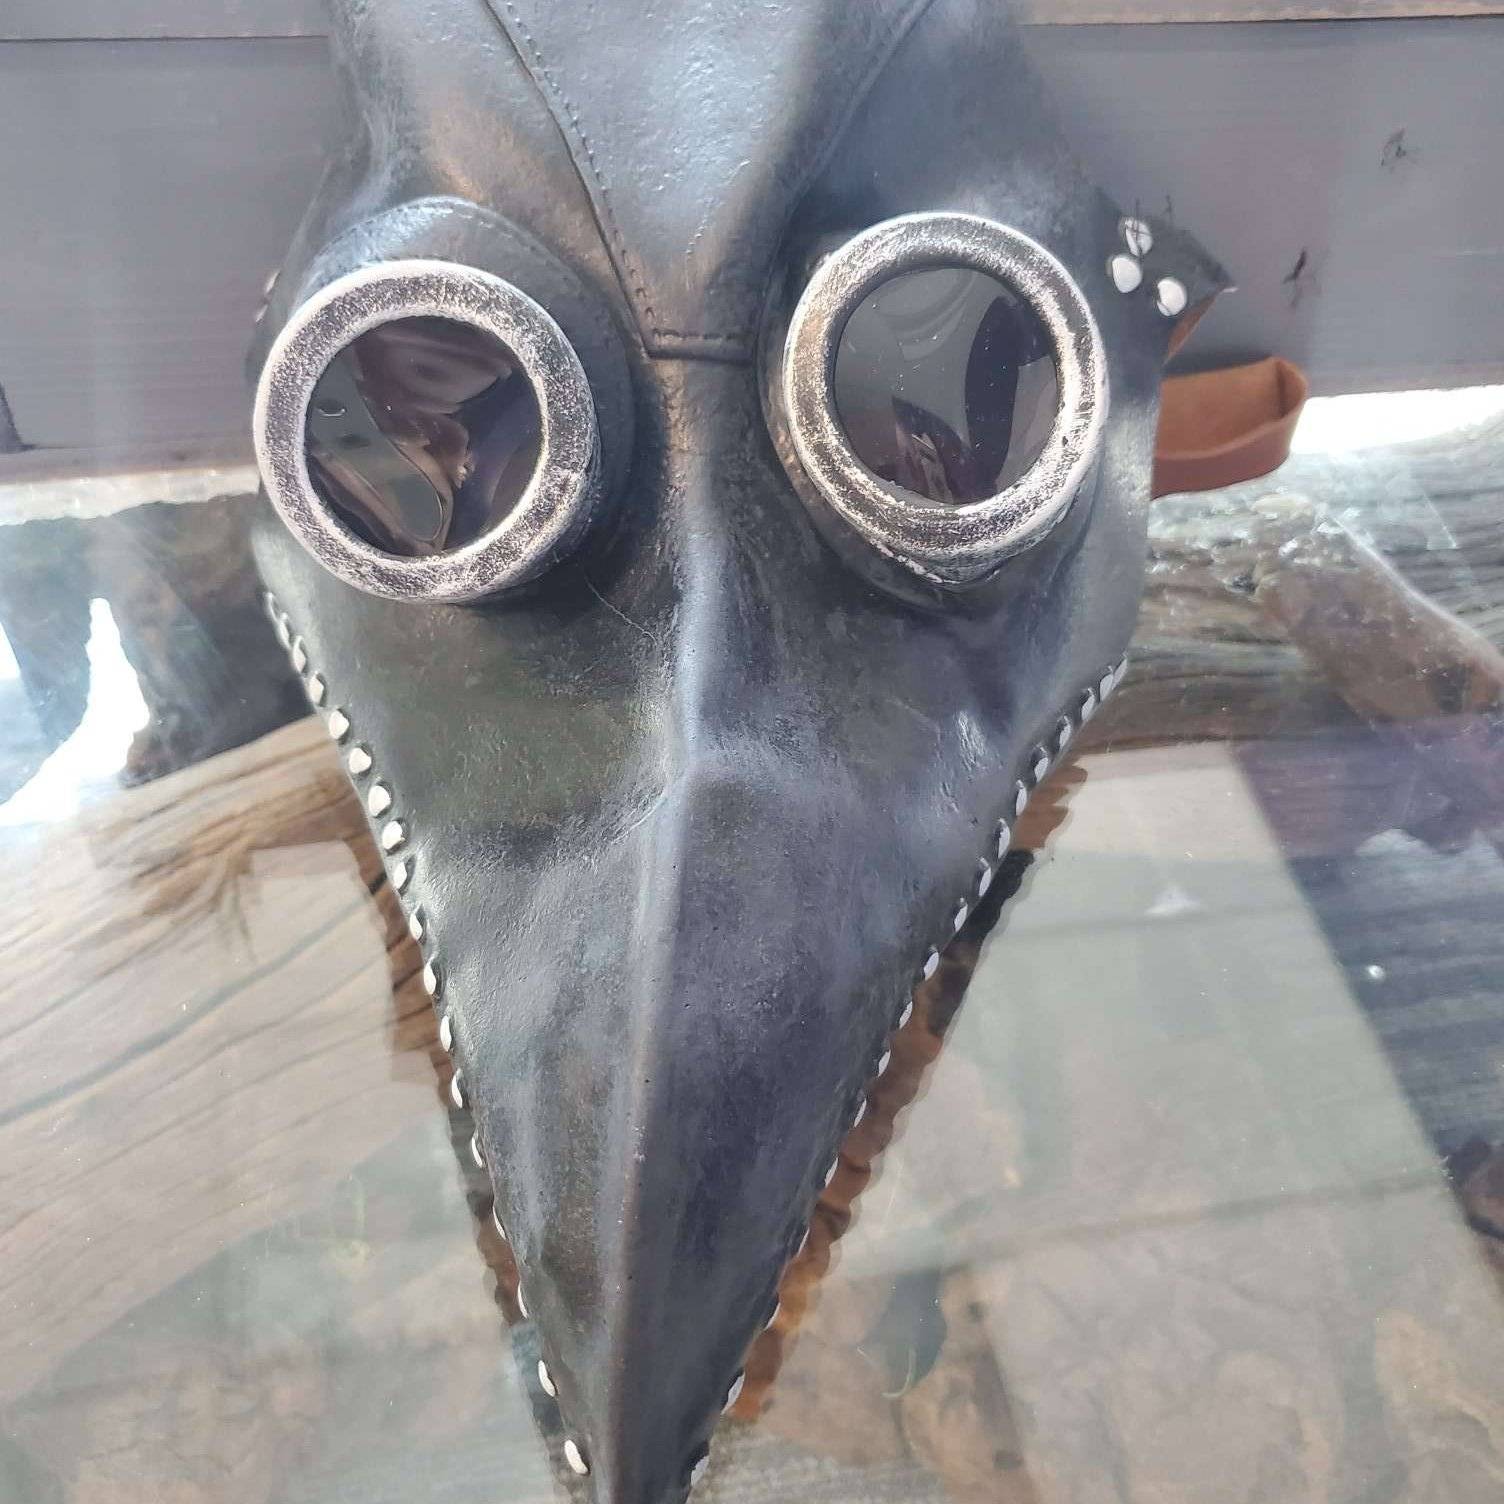 Halloween Plague Doctor Mask Best Sellers Other Products cb5feb1b7314637725a2e7: Black|Bronze|Grey